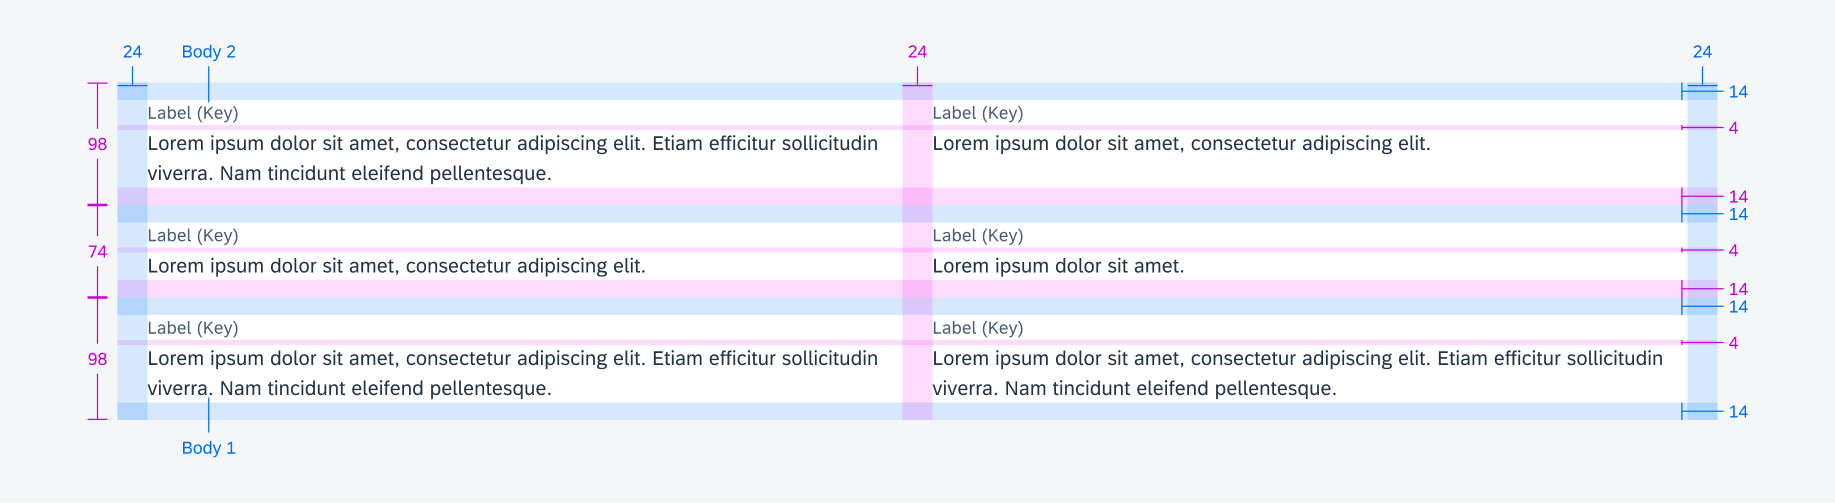 Tablet: key value cells in two-column layout specifications